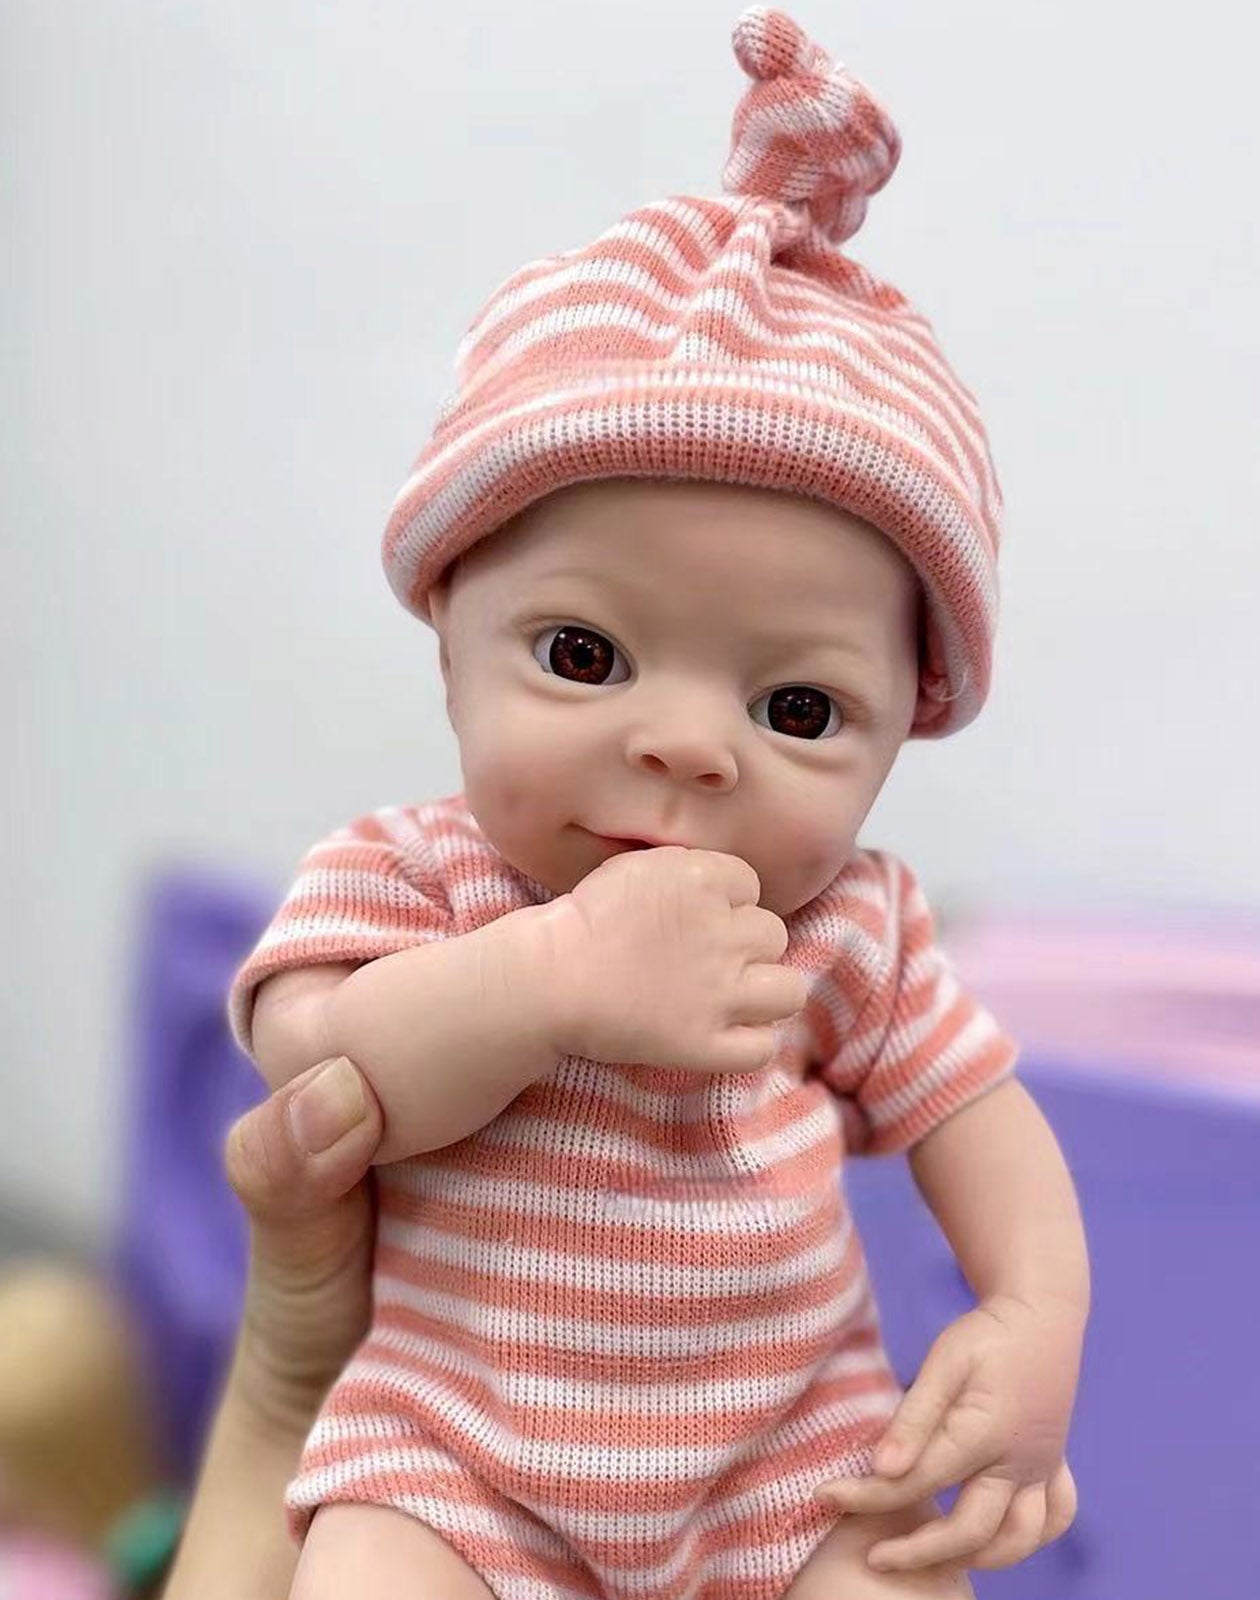 Hank - 13" Solid Platinum Liquid Full Silicone Reborn Baby Boy Doll with Extremely Flexible Body